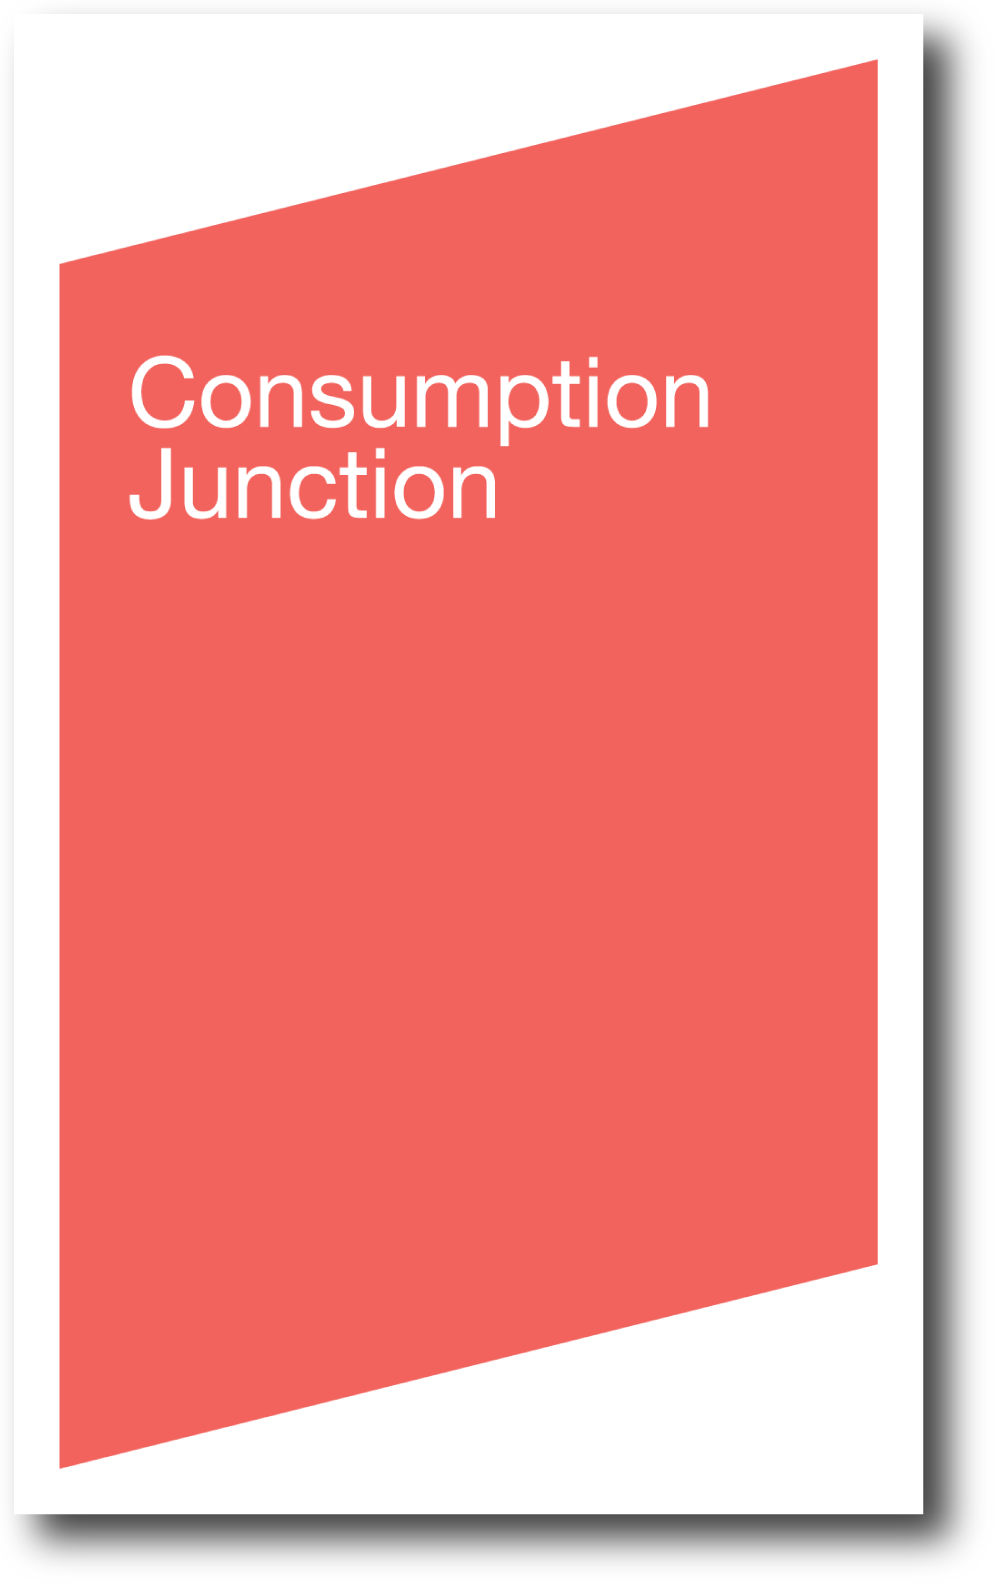   Consumption Junction , 2007, 52 pages, 8.25 x 5 inches. 